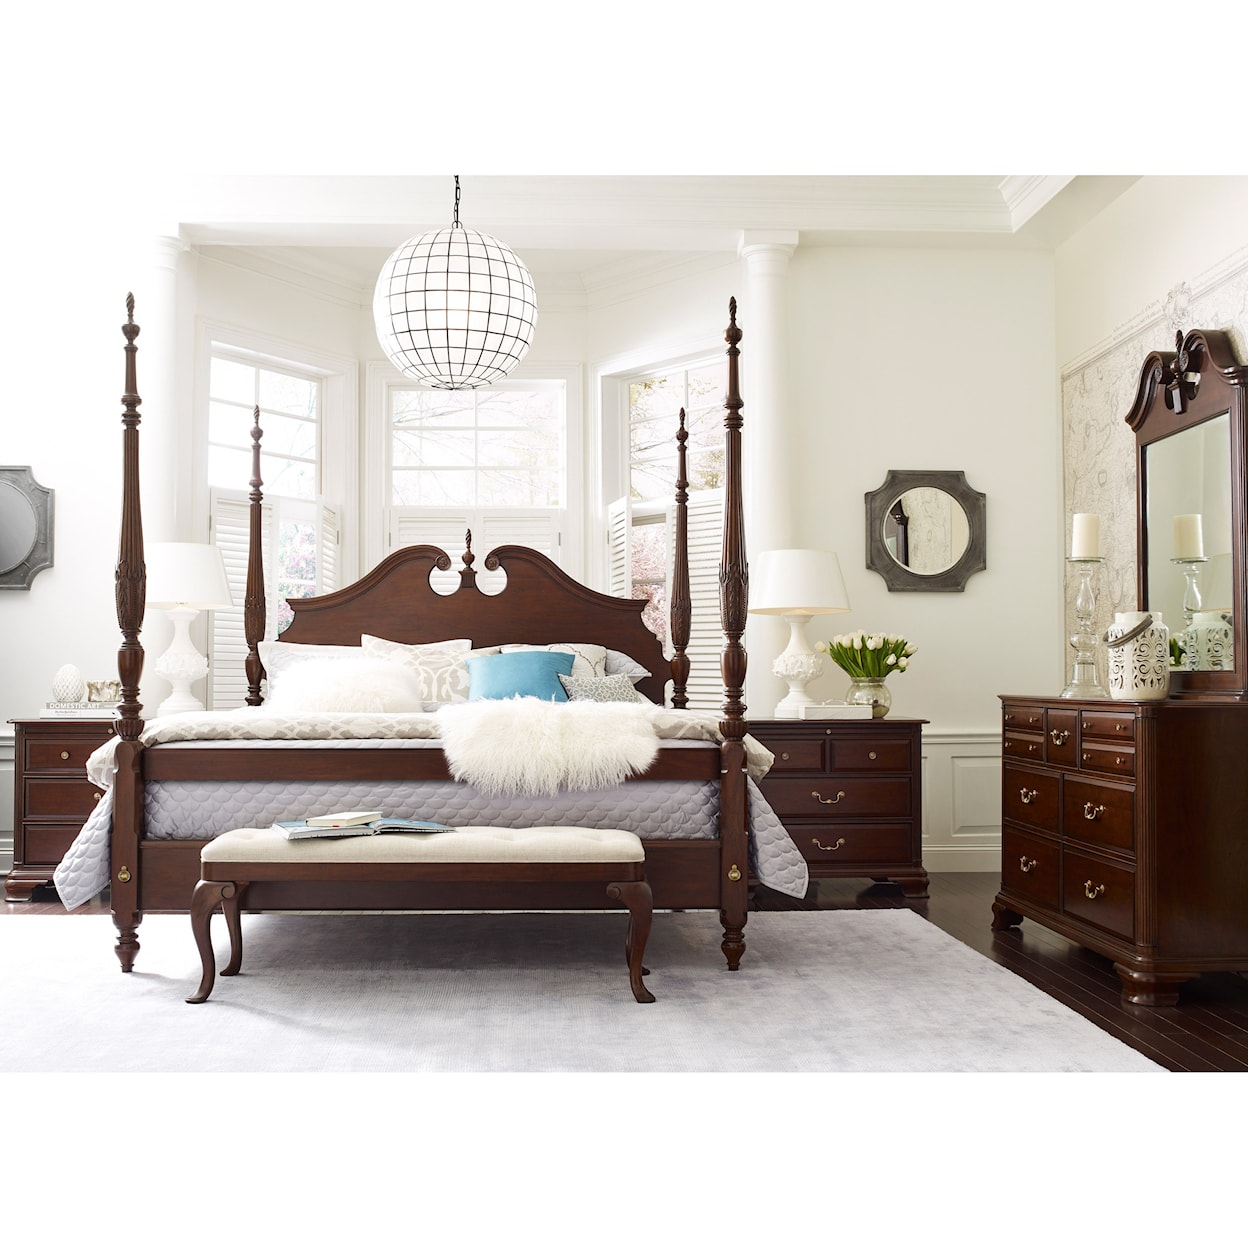 Kincaid Furniture Hadleigh Rice Carved Bed 6/0 Cali King Package